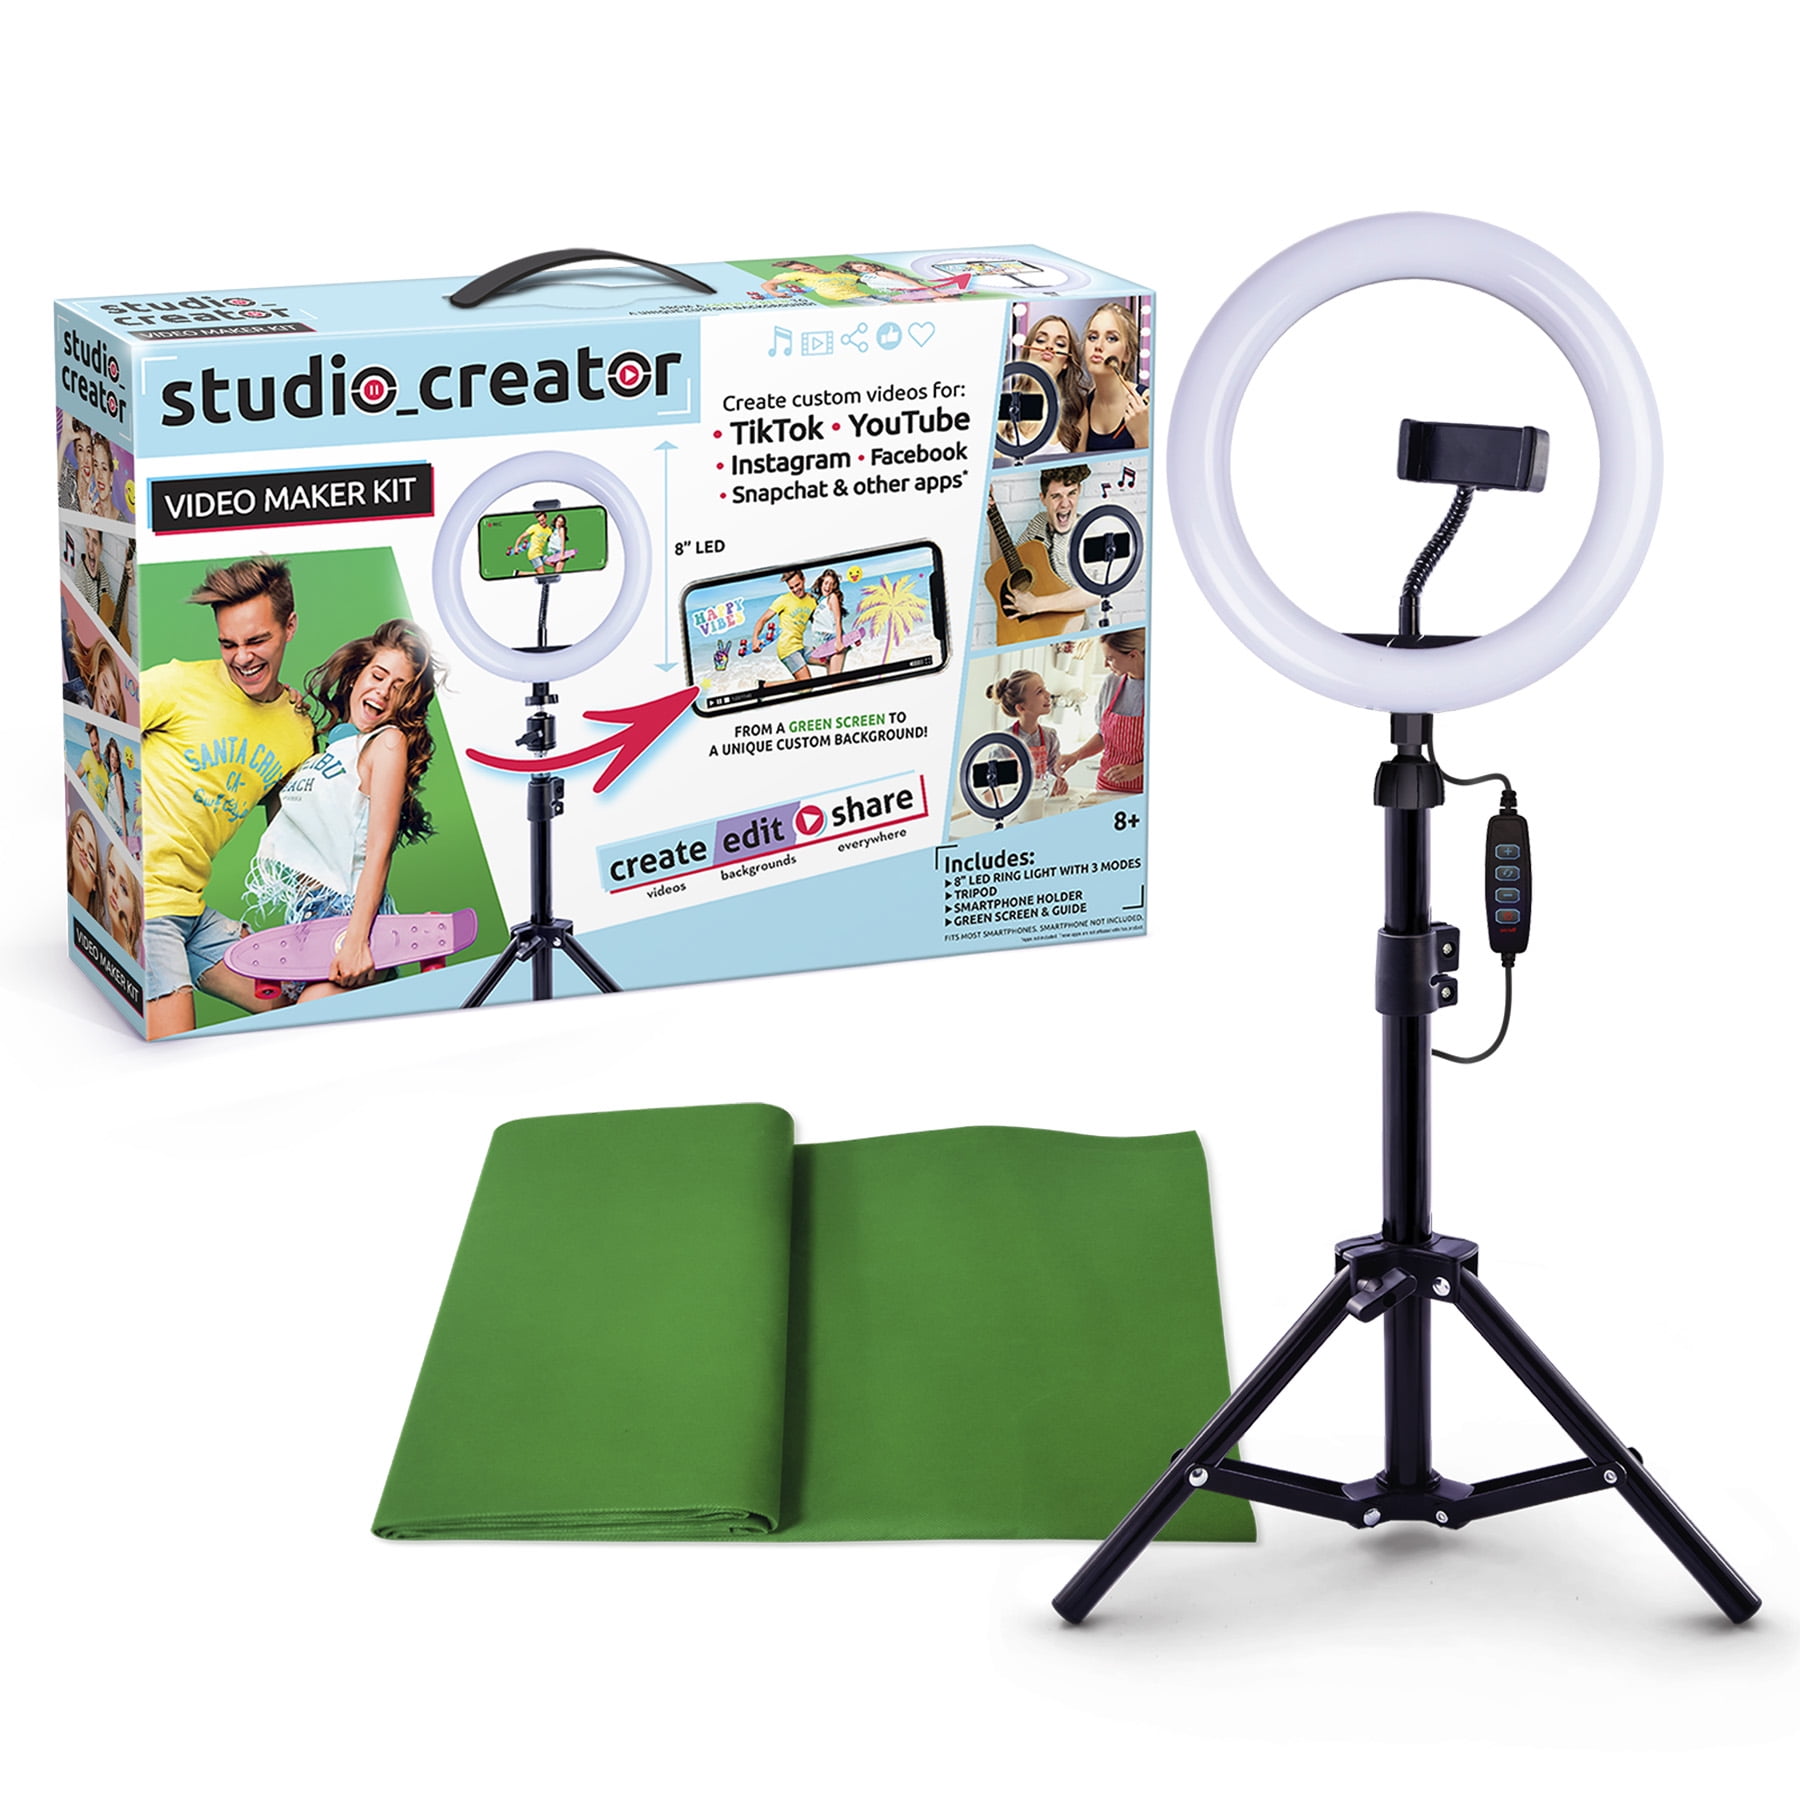 MEDIA MAKER VIDEO CREATOR - THE TOY STORE